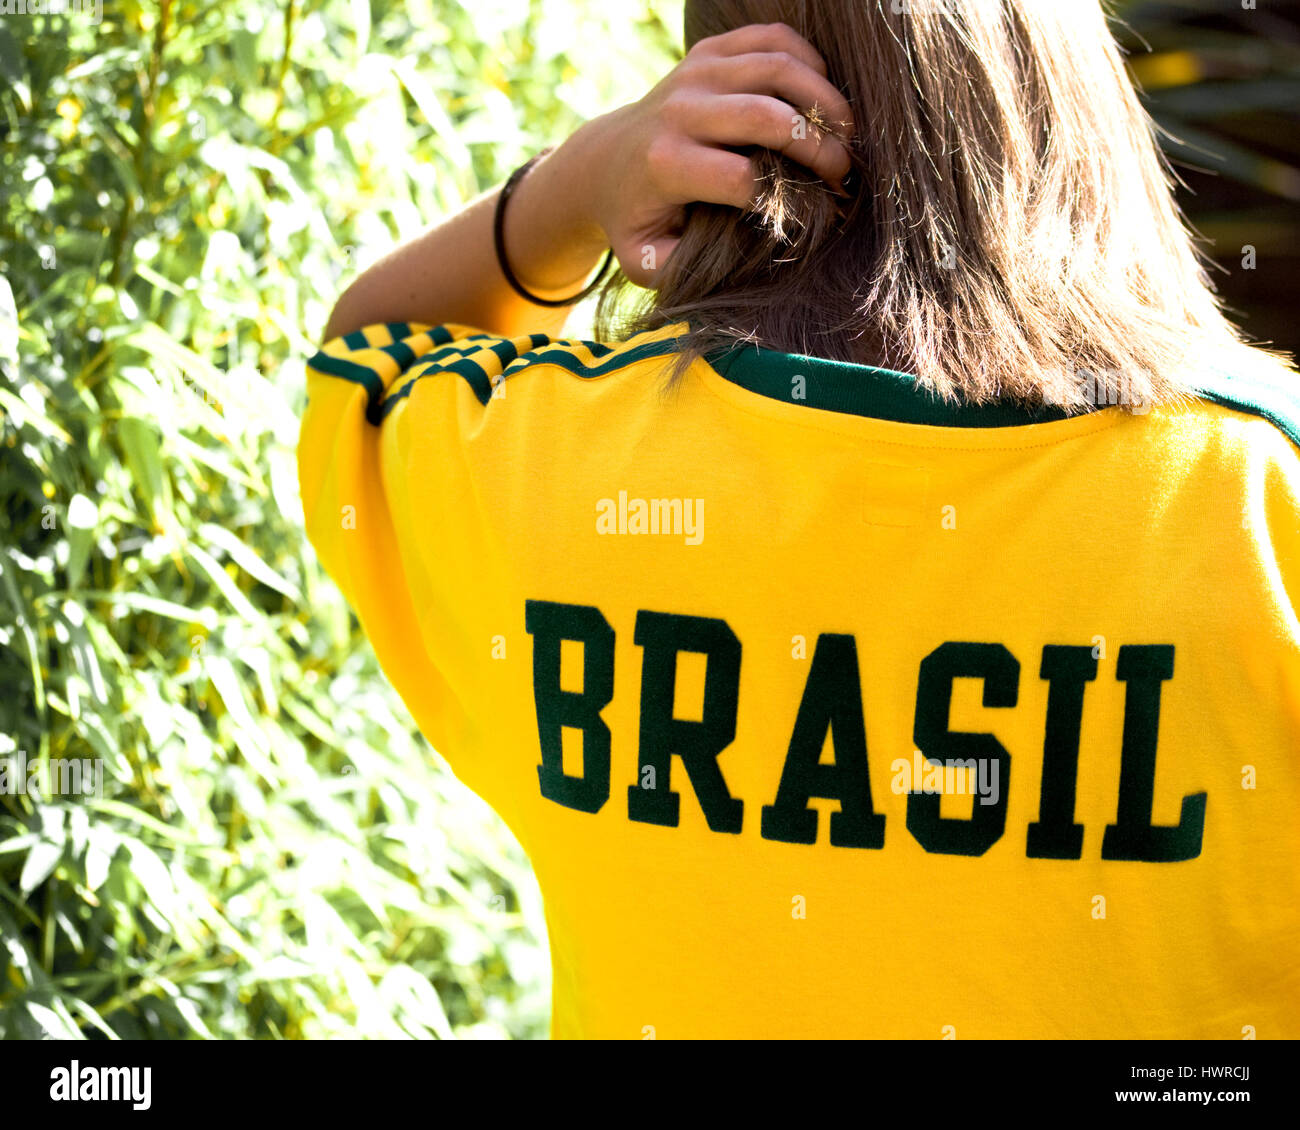 a young girl wearing a sports shirt in the Brasil national colours of green and yellow with Brasil spelt out across the back Stock Photo